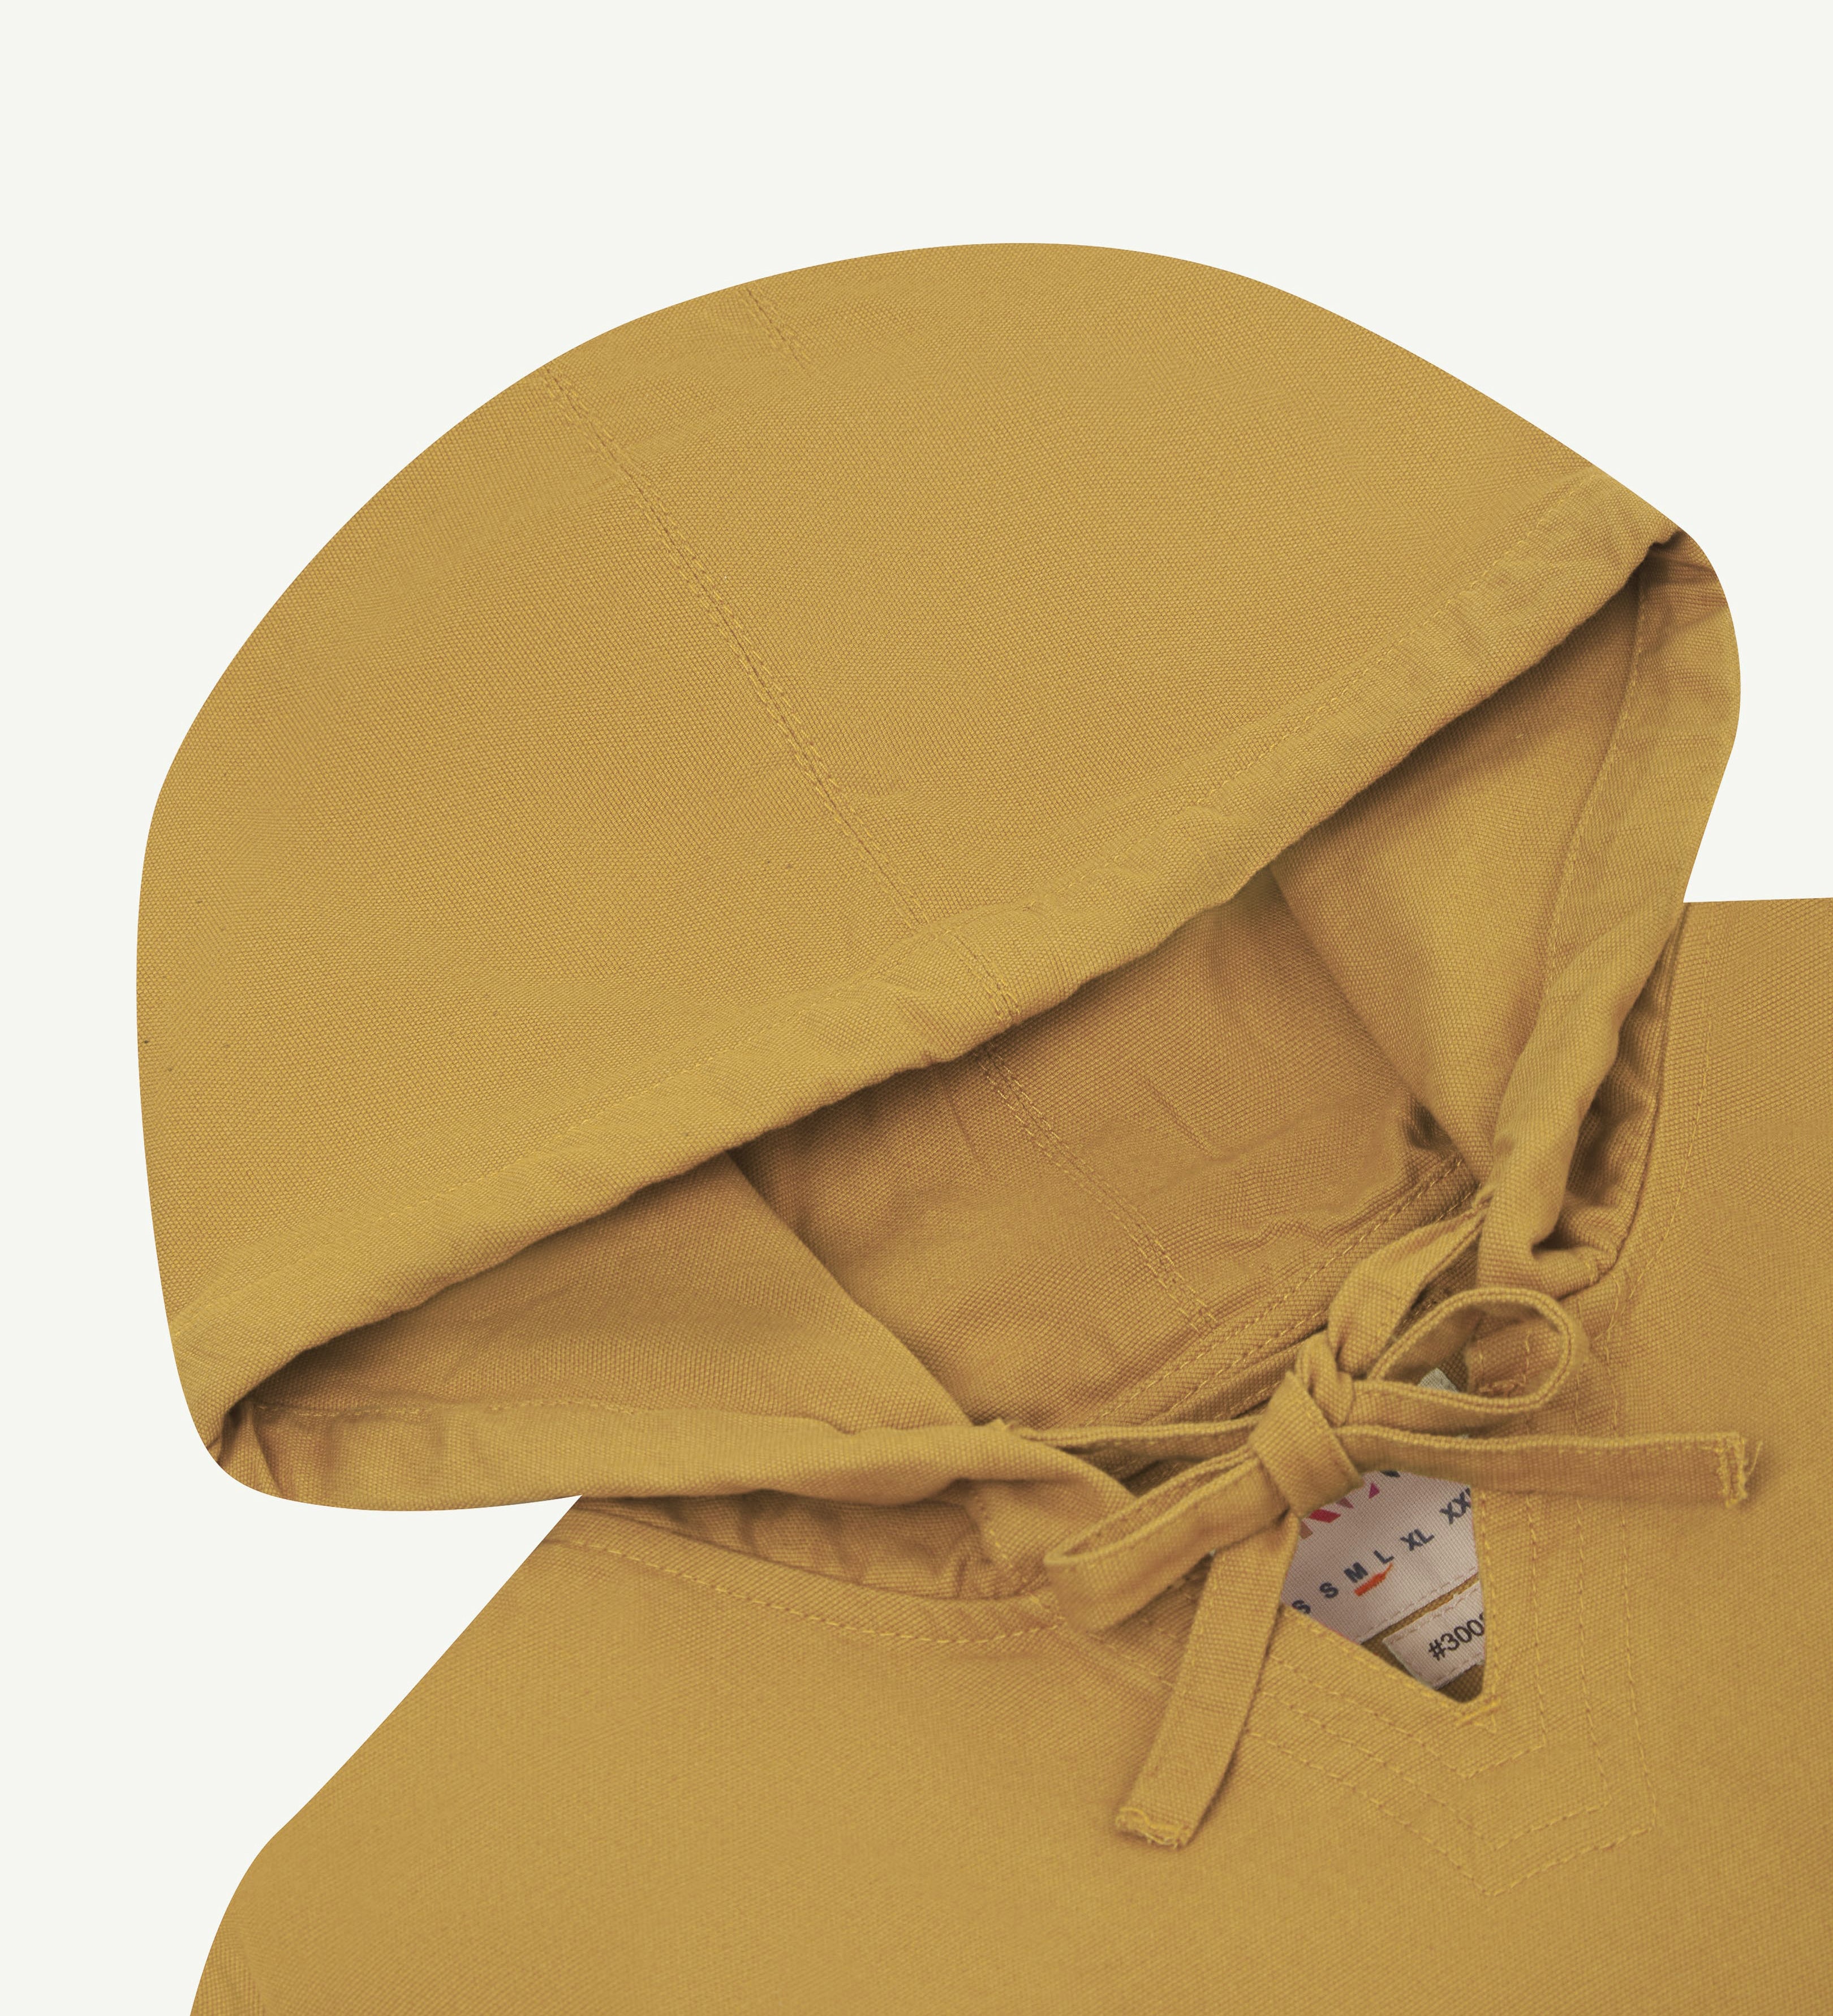 Detail shot of uskees yellow men's organic cotton smock showing hood and neck tie detail